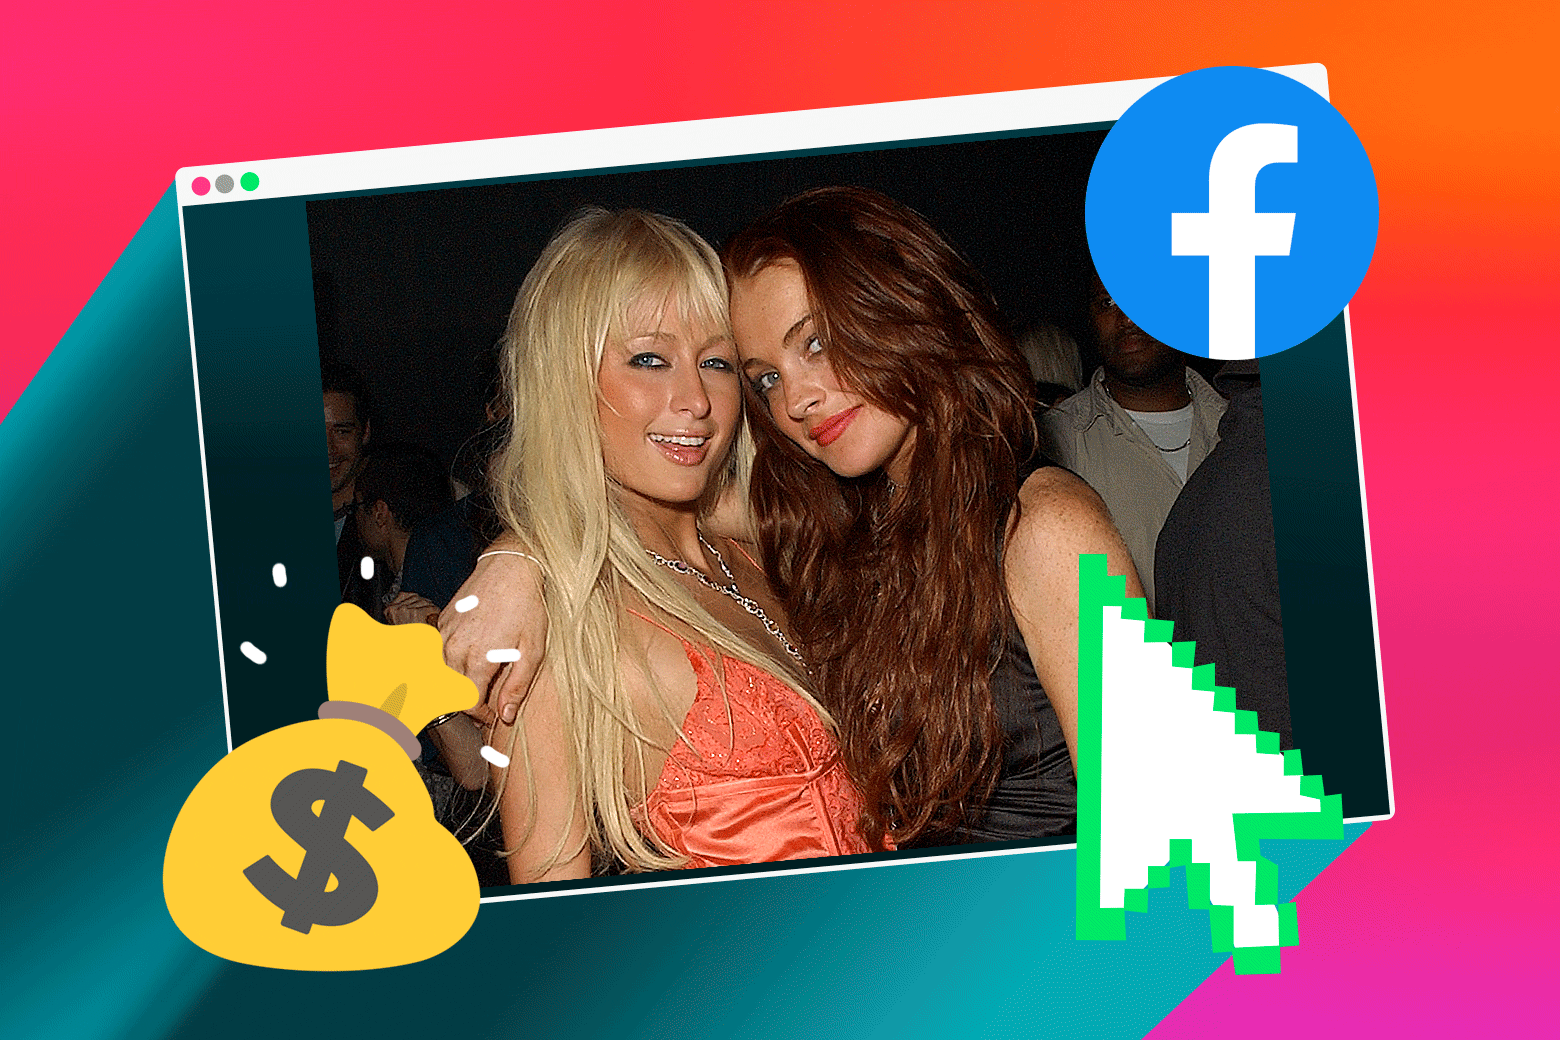 The Netflix Bling Ring documentary shows how important the internet was to their crimes.